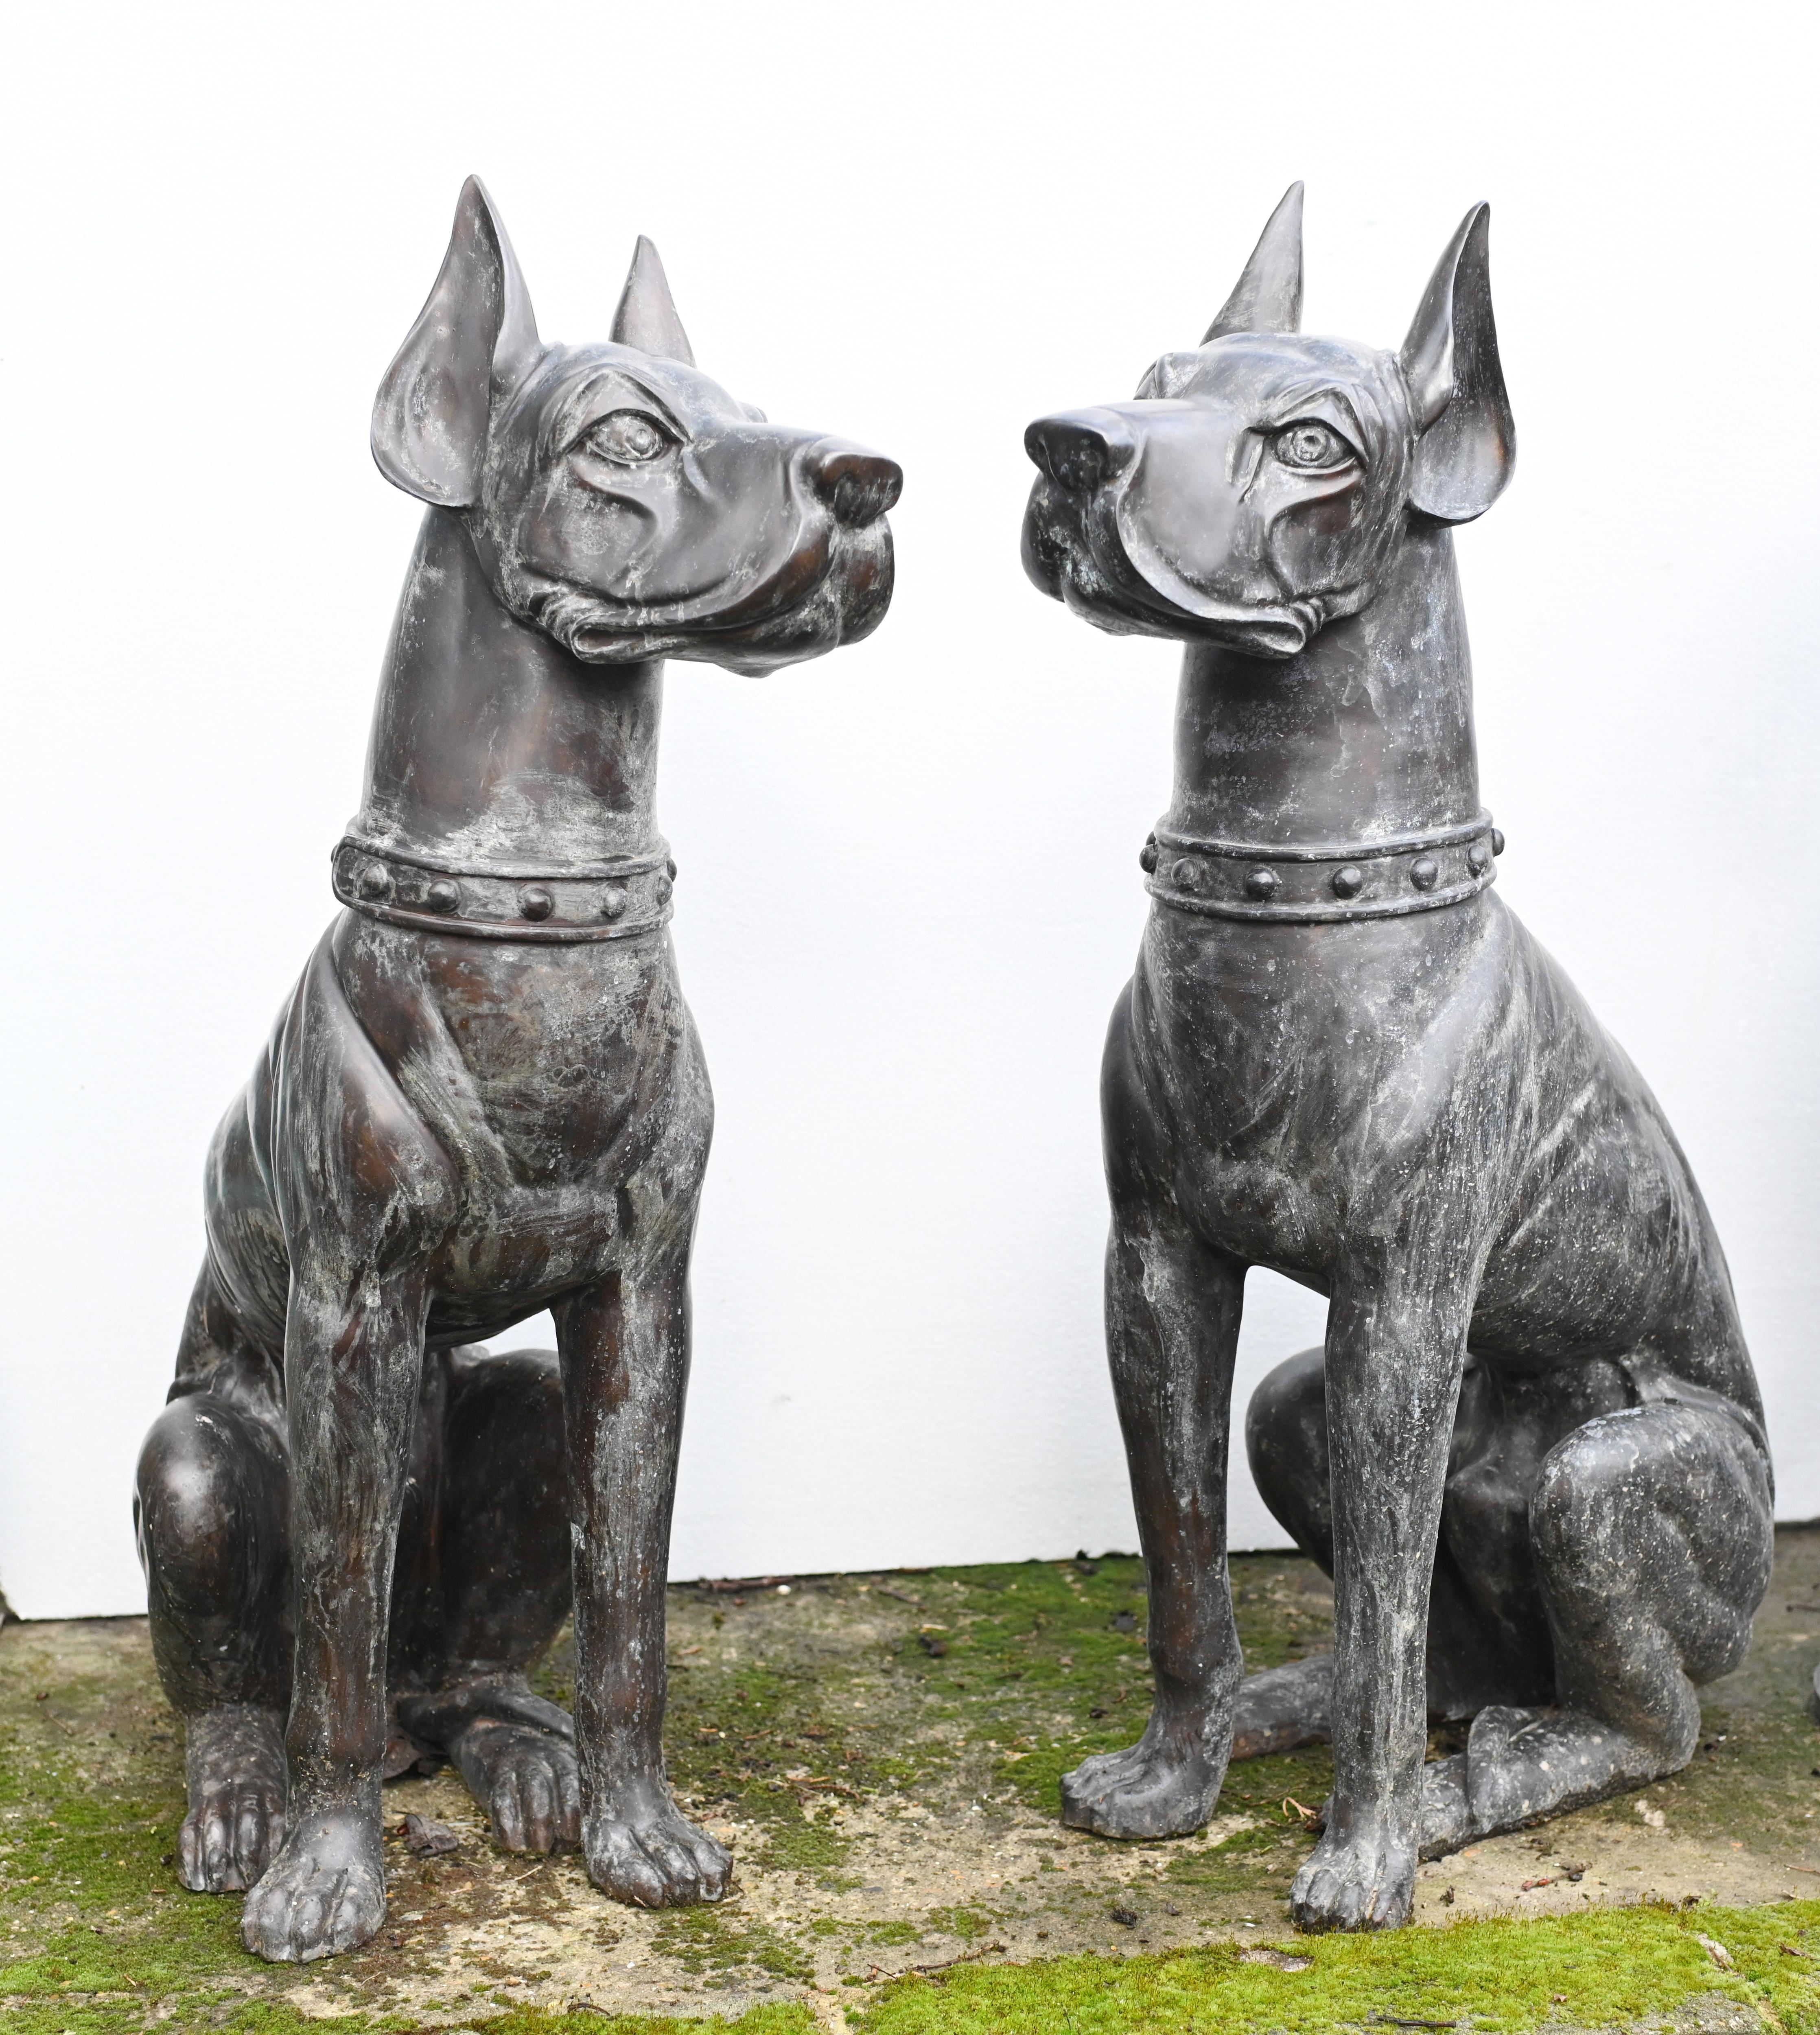 Quirky pair of large bronze boxer dogs
Good size at three feet tall - 91 CM
Lovely patina to the bronze on this characterful pair
Great for the garden and will not rust
Offered in great shape ready for home use right away
We ship to every corner of